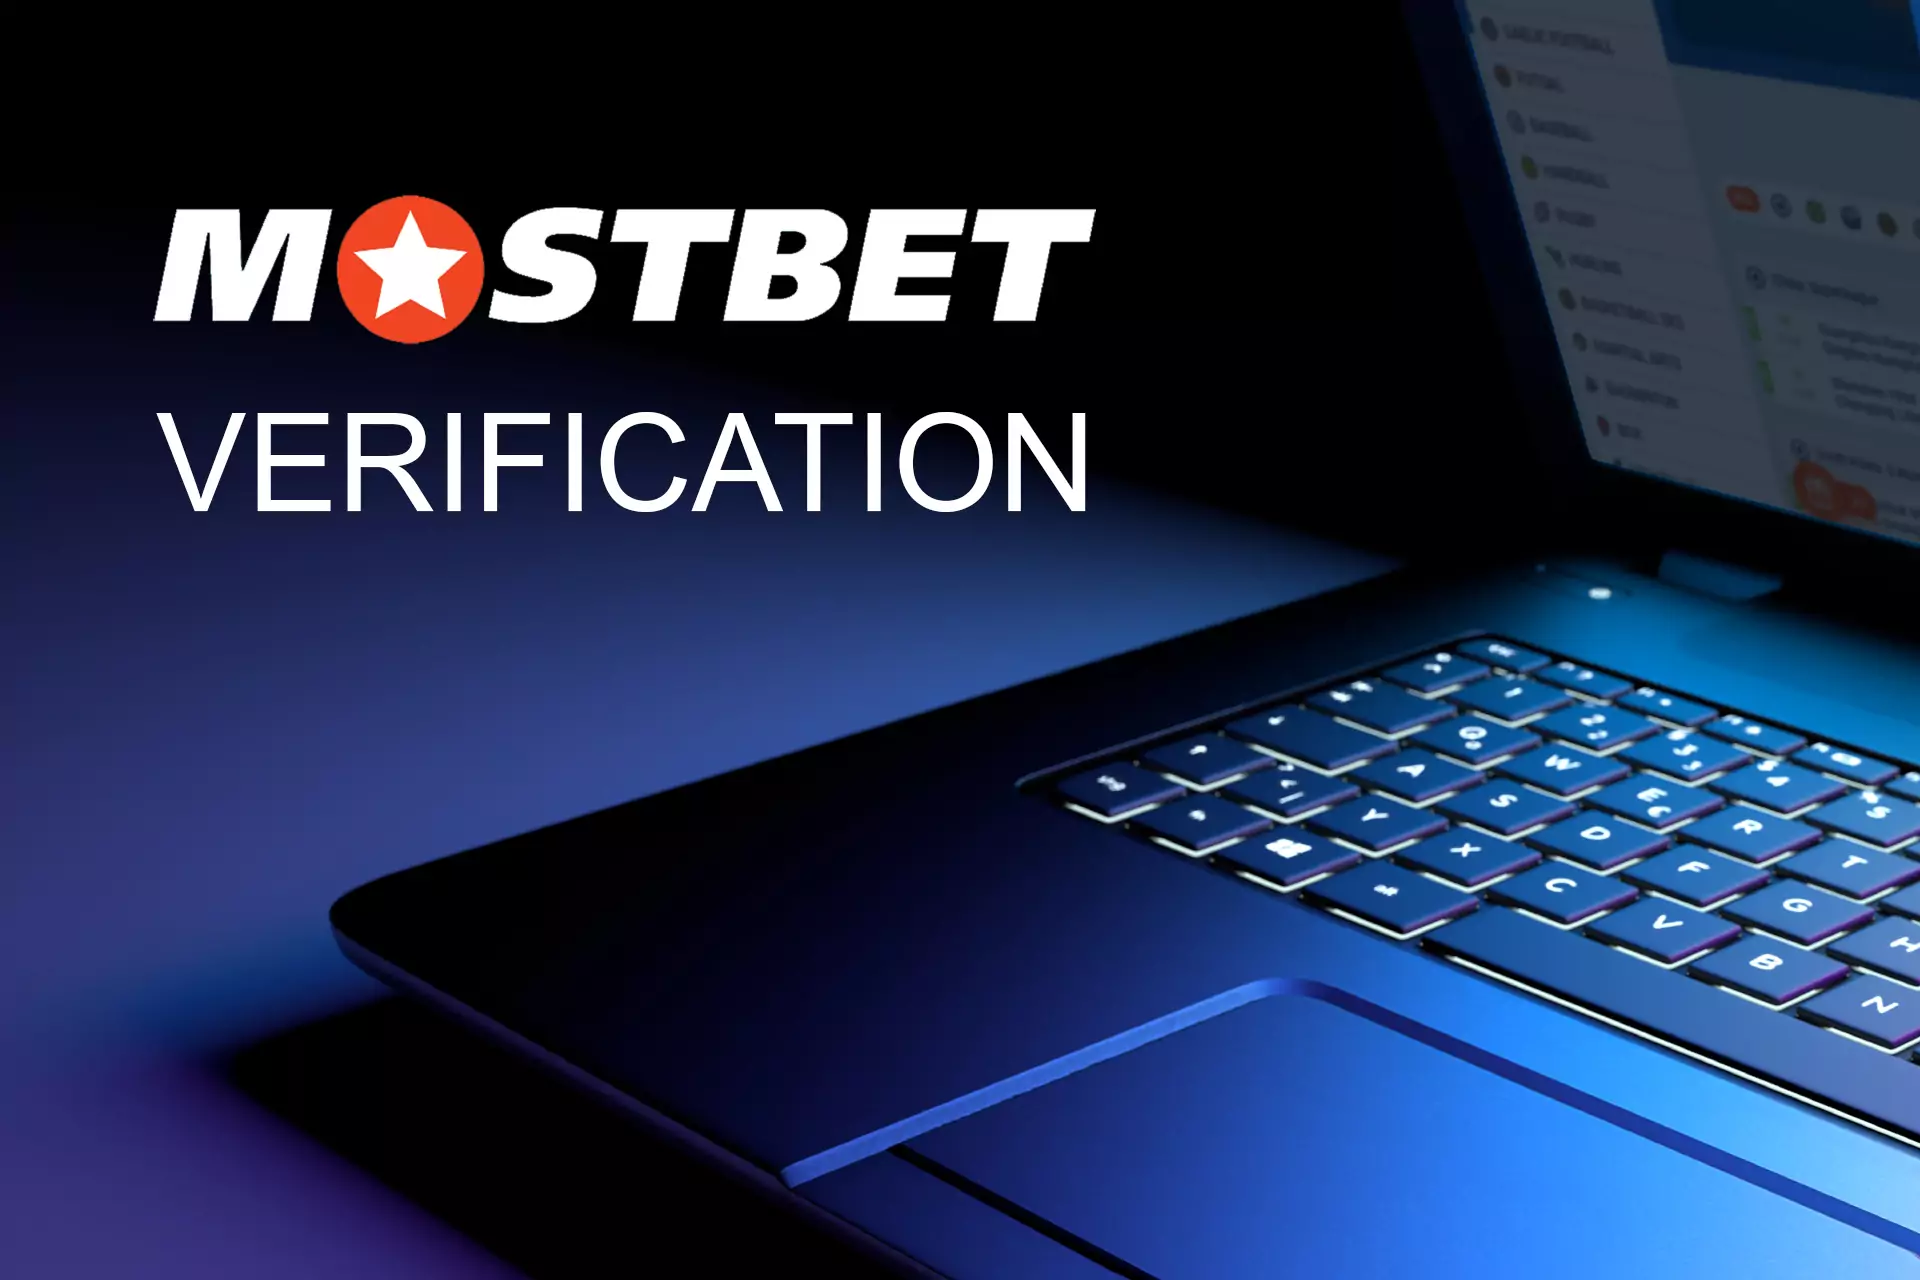 Verify the Mostbet account with your real documents.